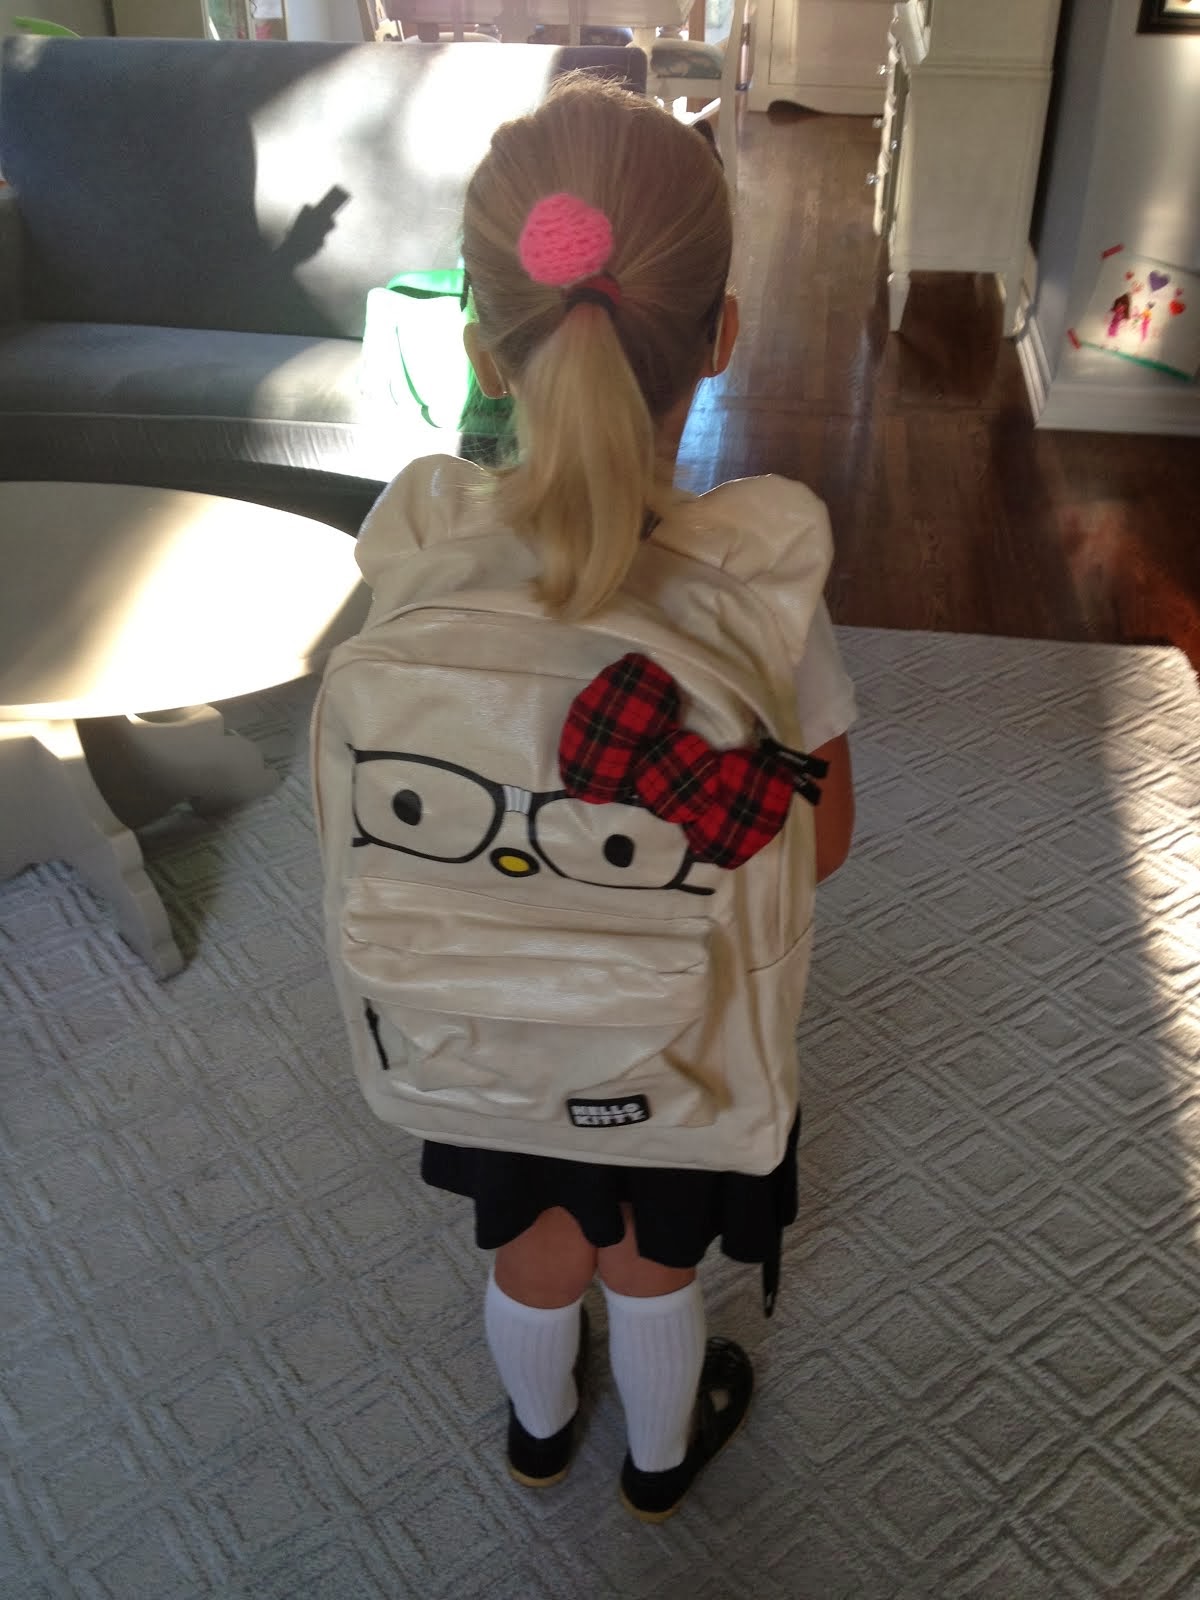 Off to school she goes...